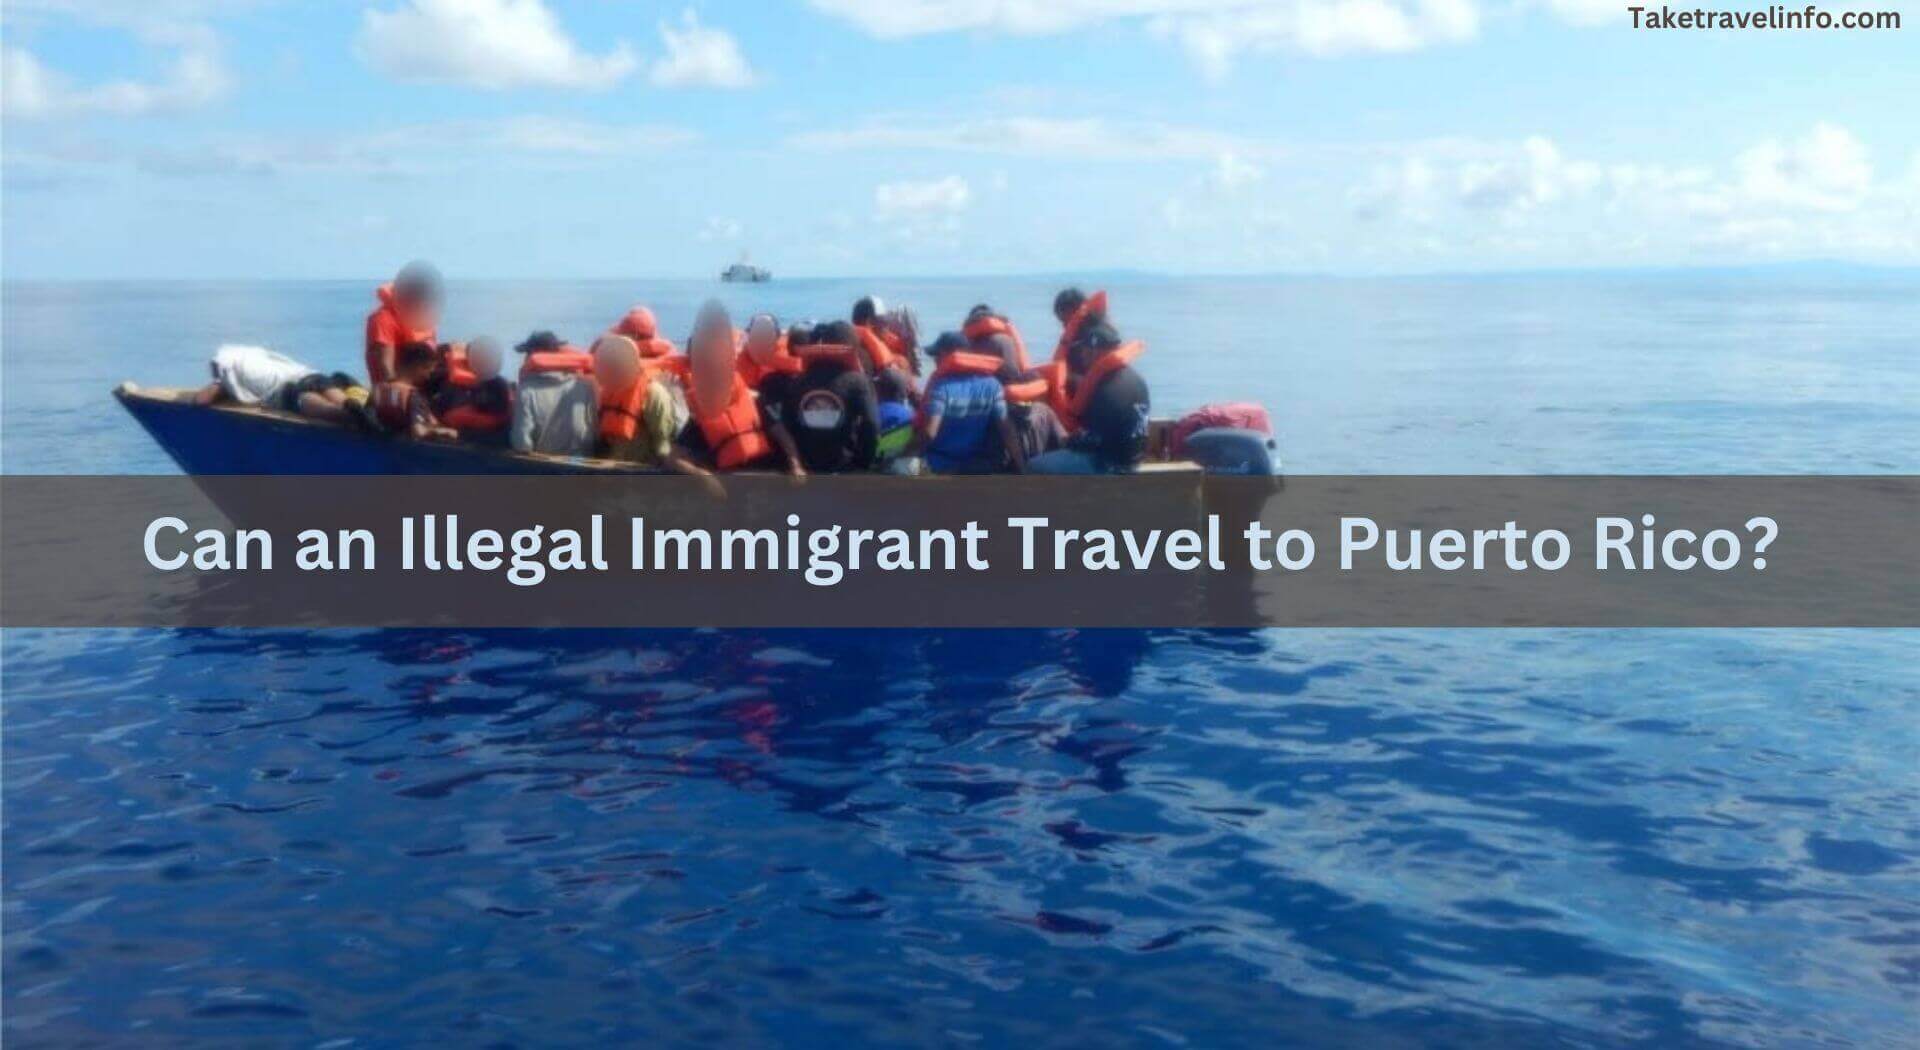 Can an Illegal Immigrant Travel to Puerto Rico?